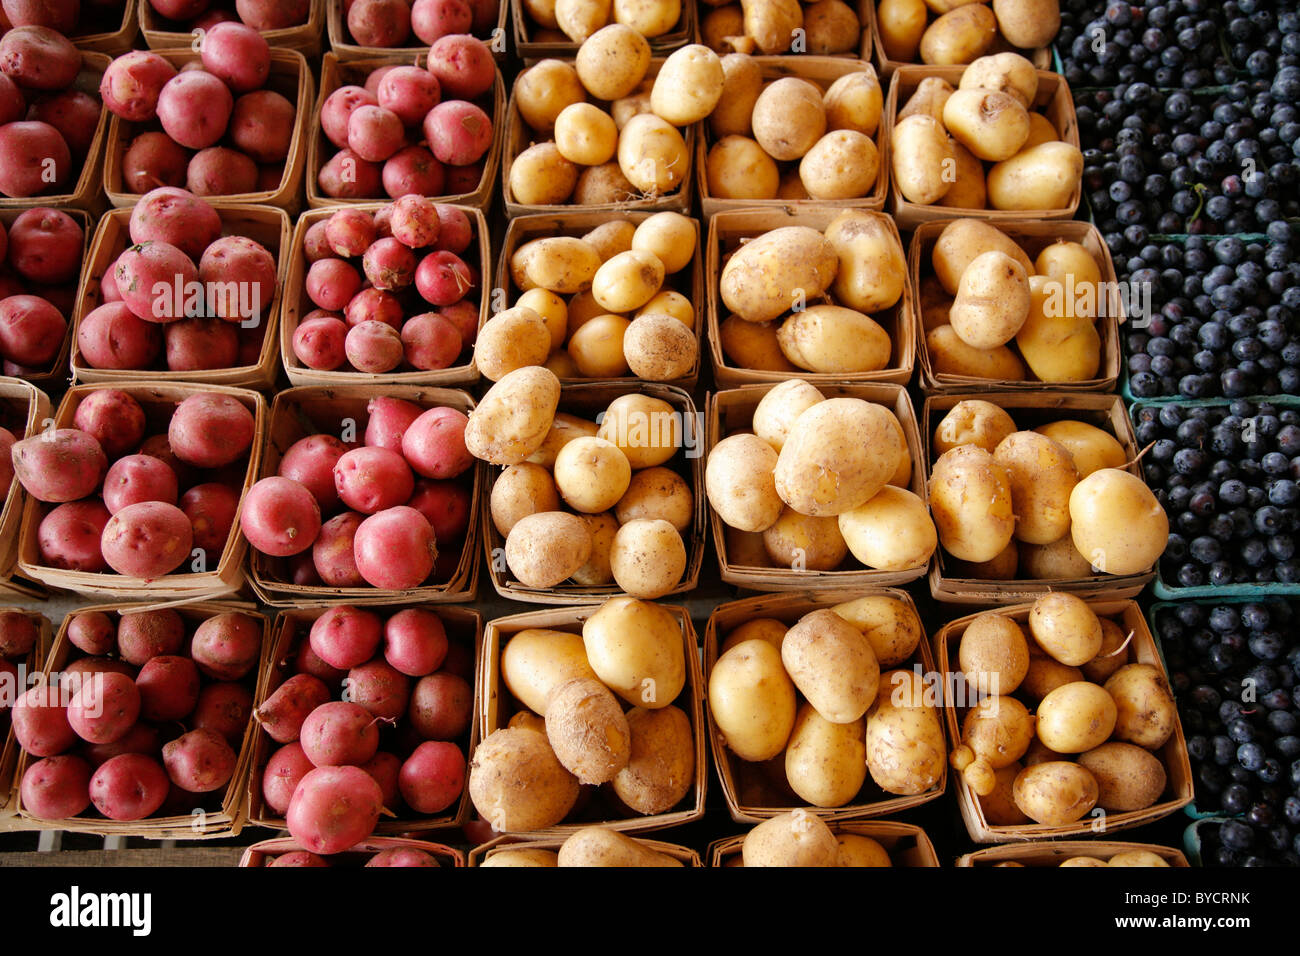 farmers market table with red and white potatoes and blueberries Stock Photo